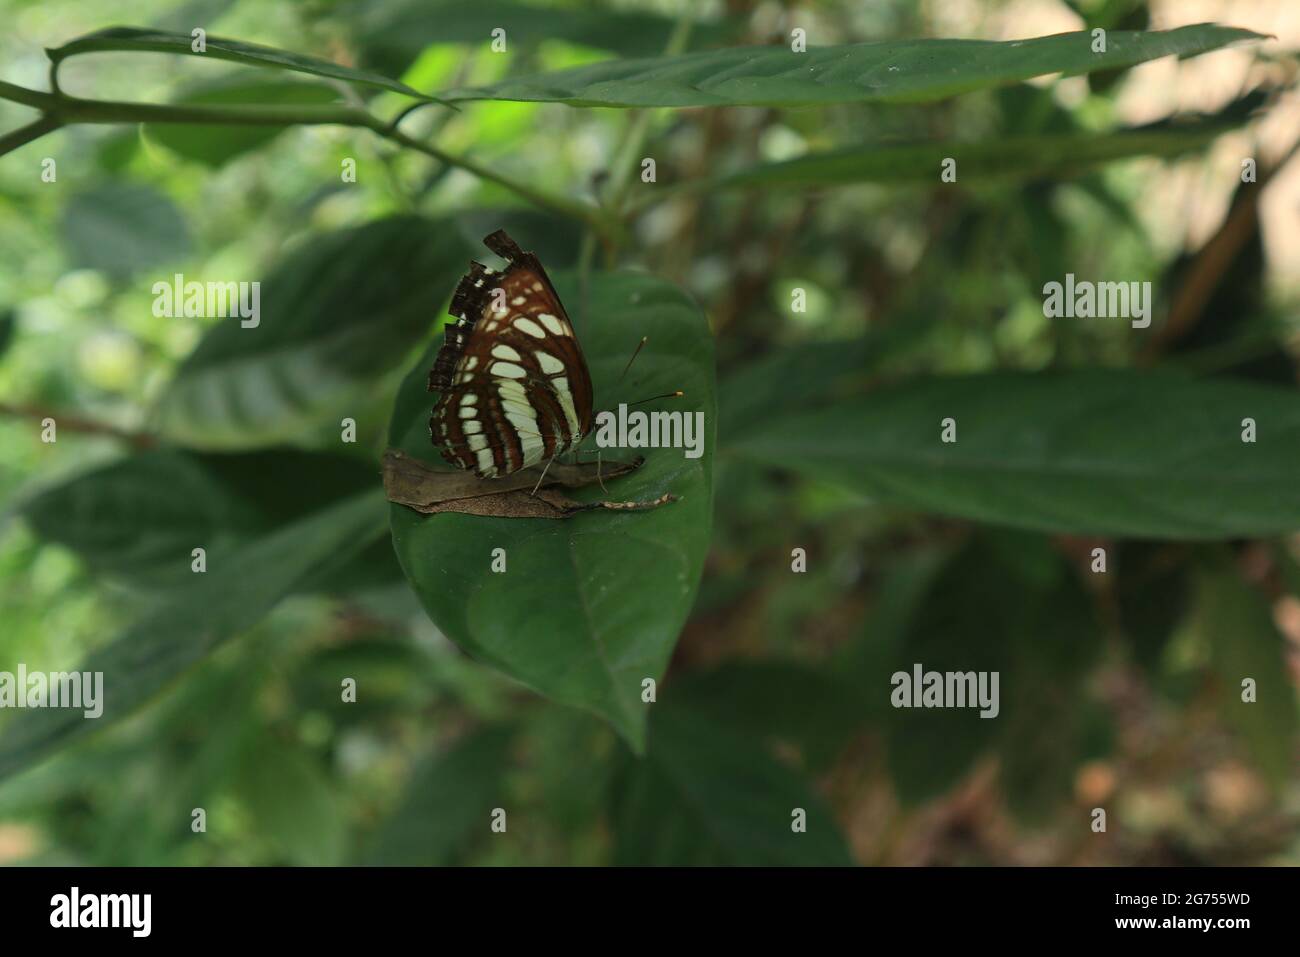 Close up of a common sailer butterfly on a green leaf Stock Photo